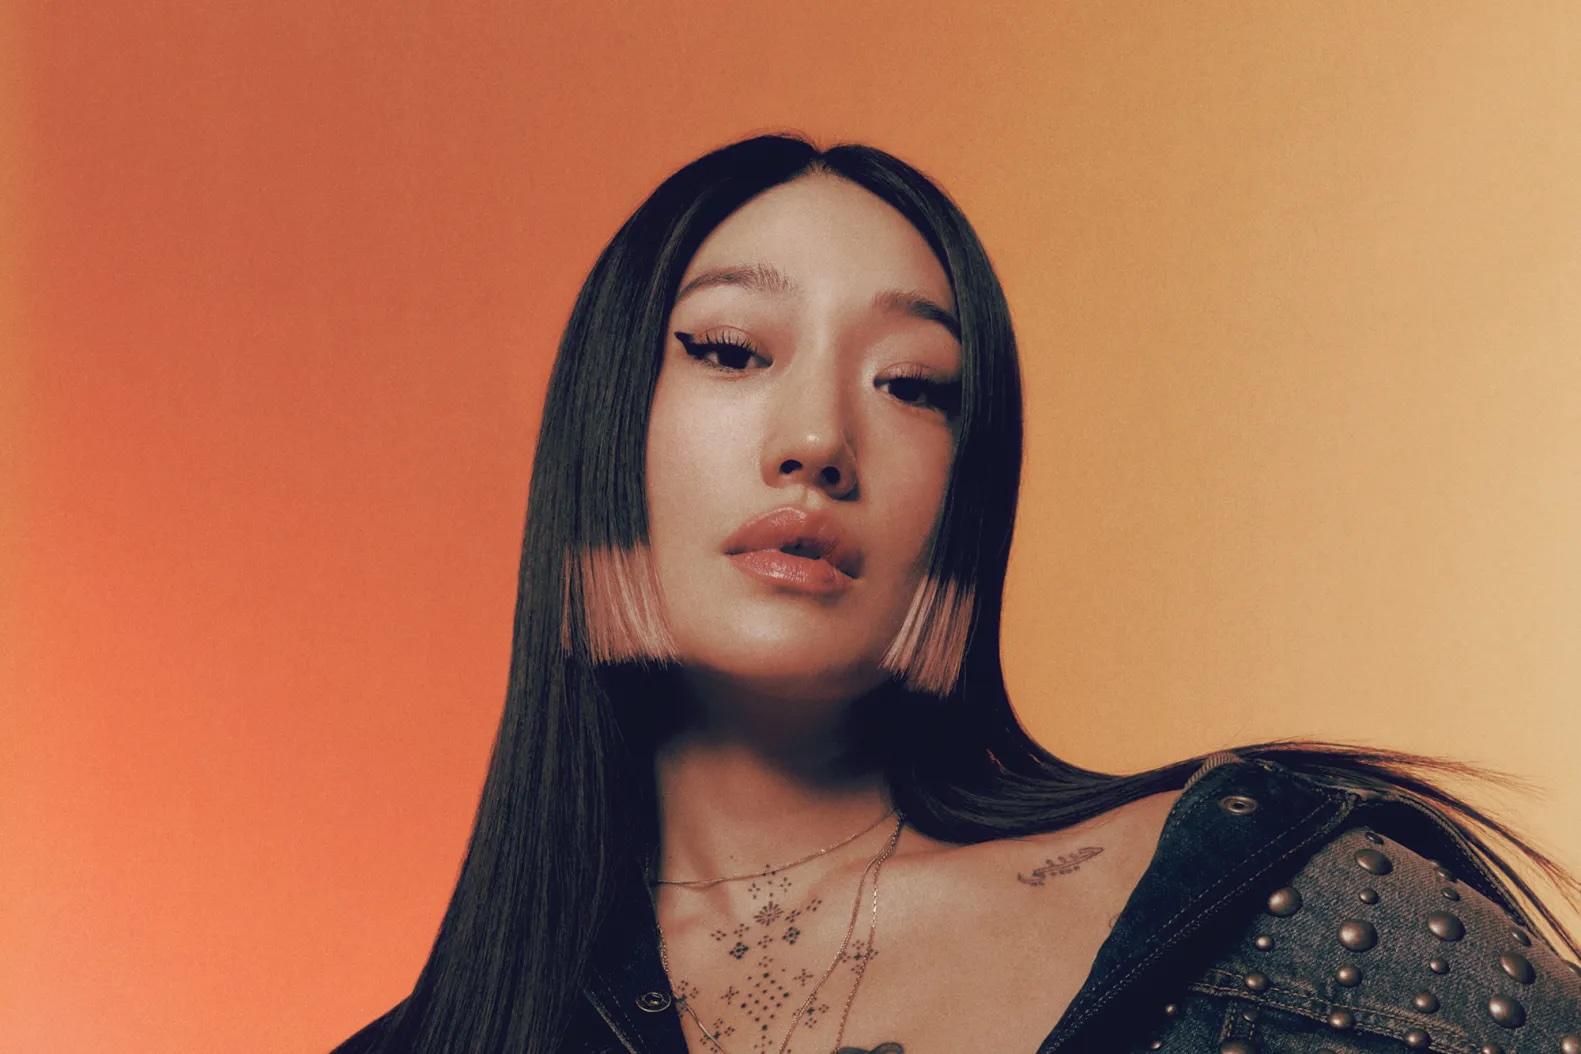 Peggy Gou is bringing a Masquerave to Louvre Abu Dhabi